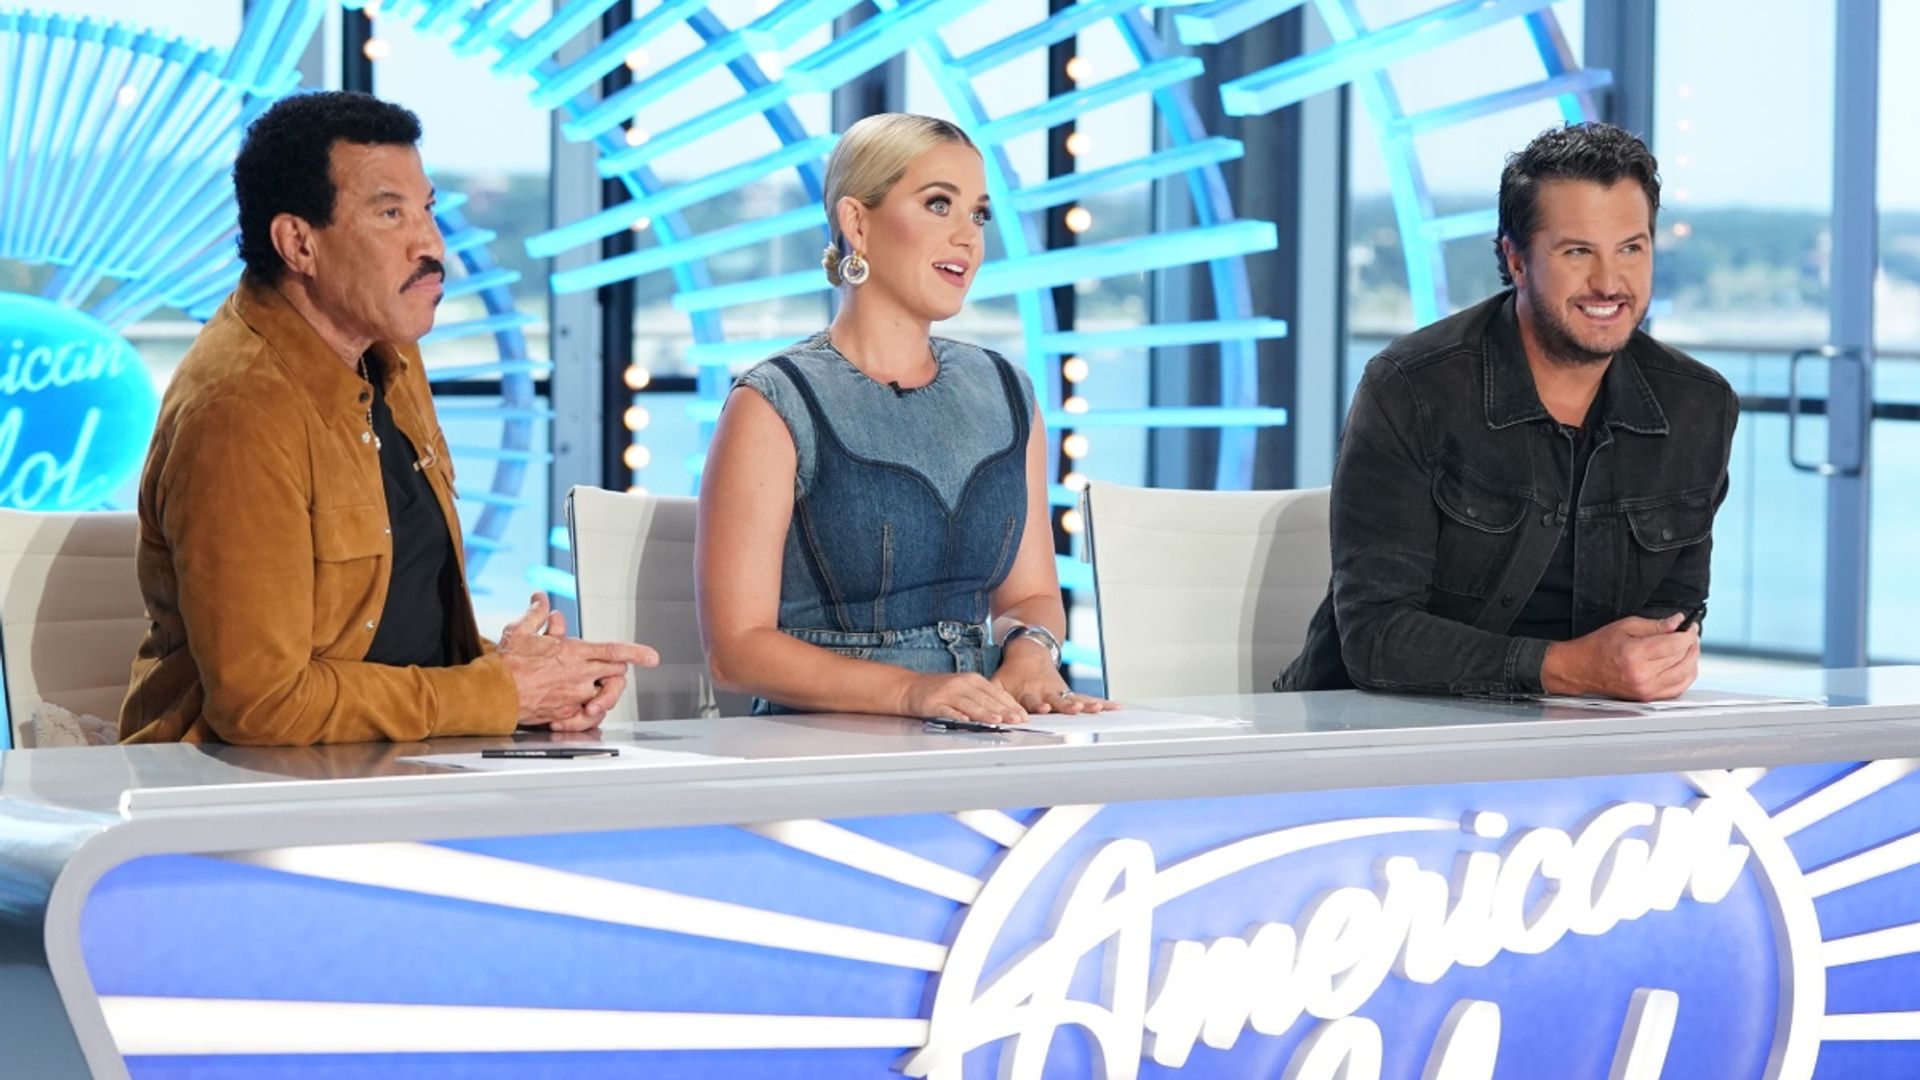 American Idol teases surprise trip ahead of new episode that leaves fans excited